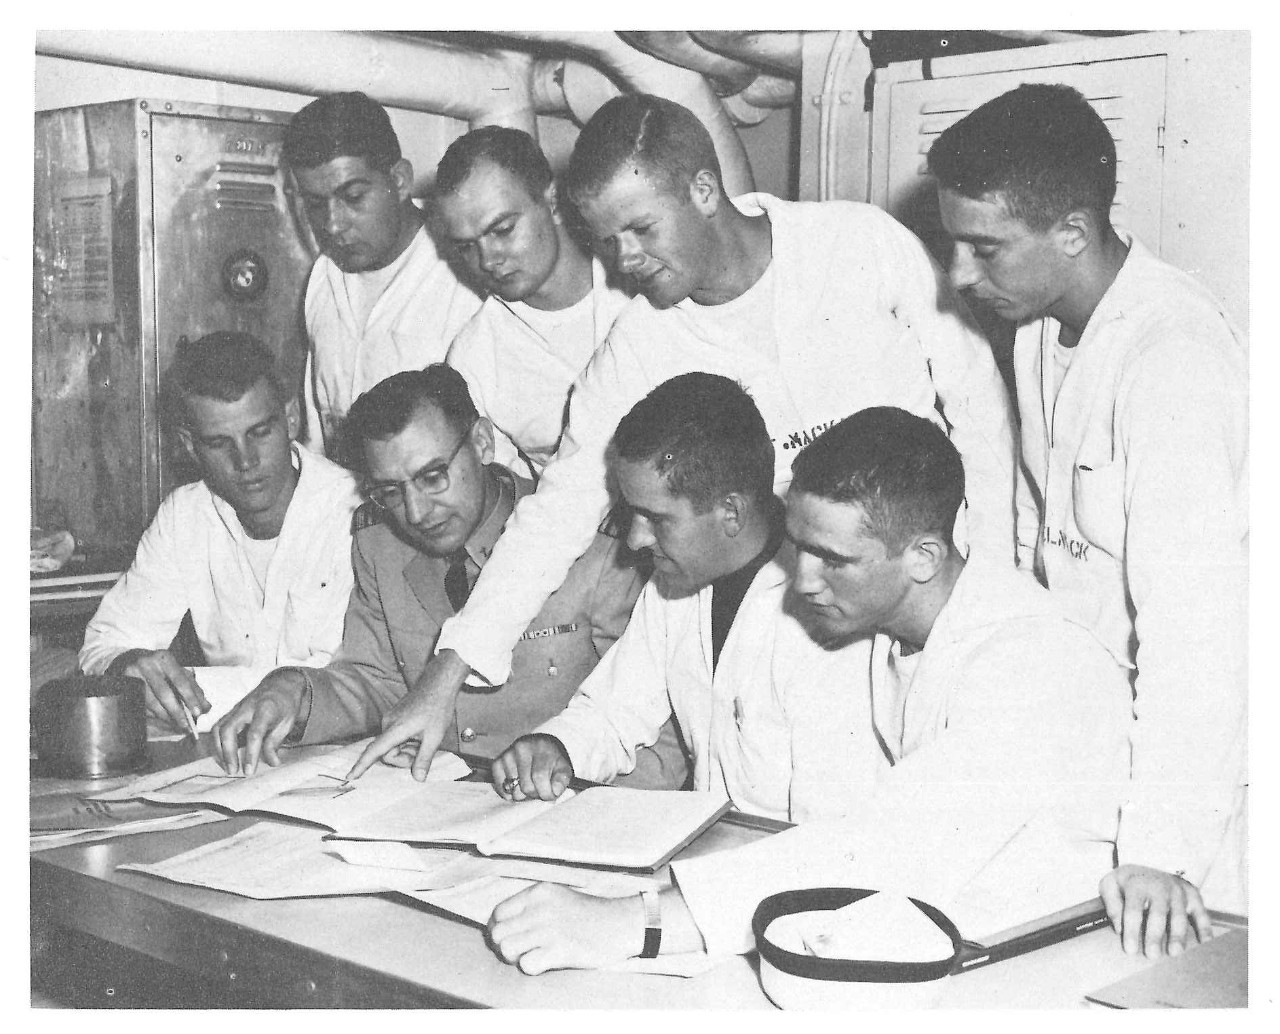 Navy seamen viewing documents with an instructor